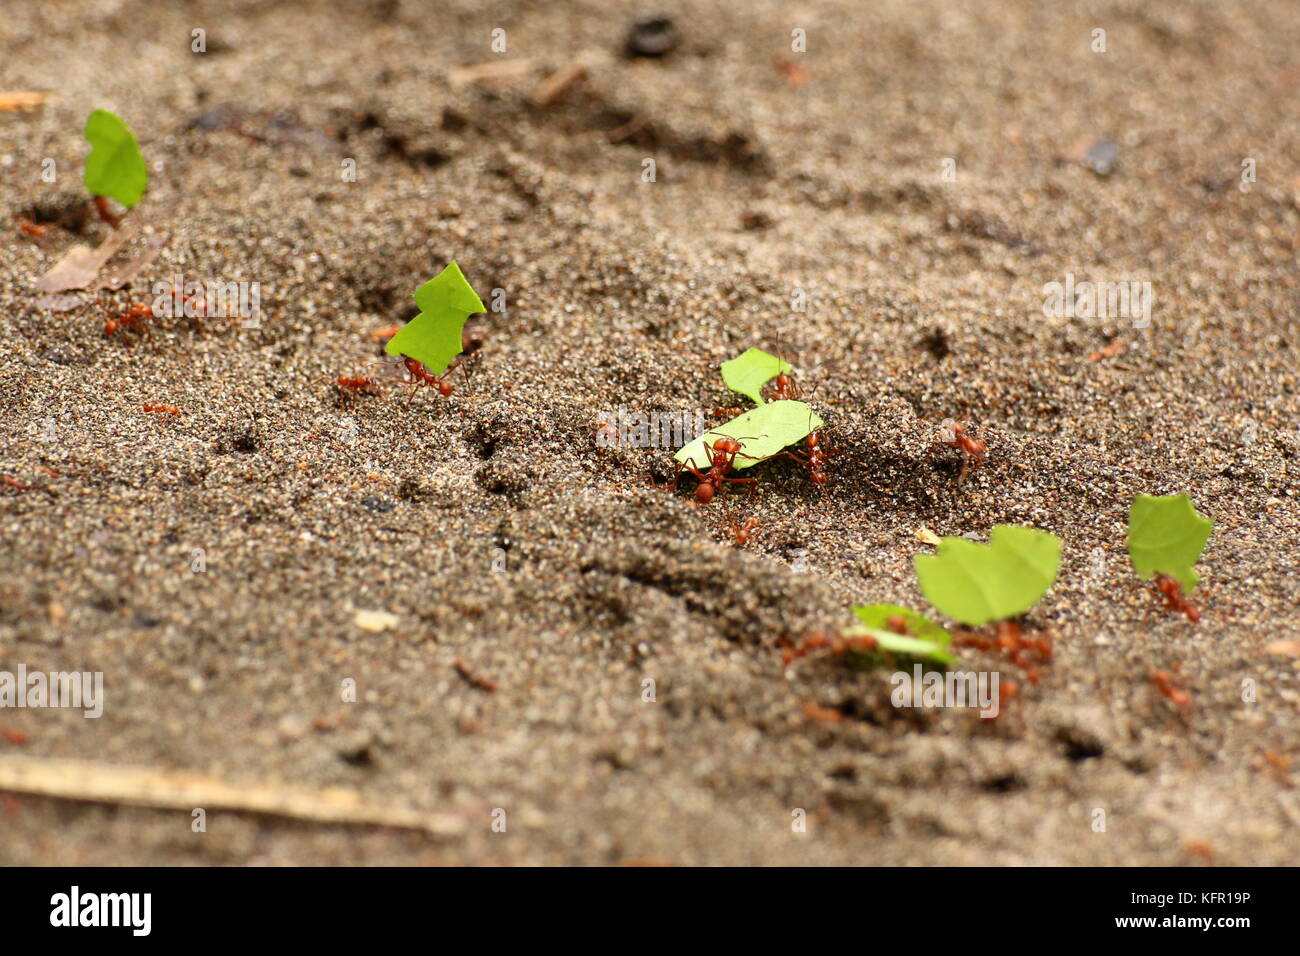 Leaf cutter ants at work, transporting small pieces of cutted leaves to their anthill. Leaf-Cutting Ants (Atta cephalotes) or zampopas in spanish. Stock Photo